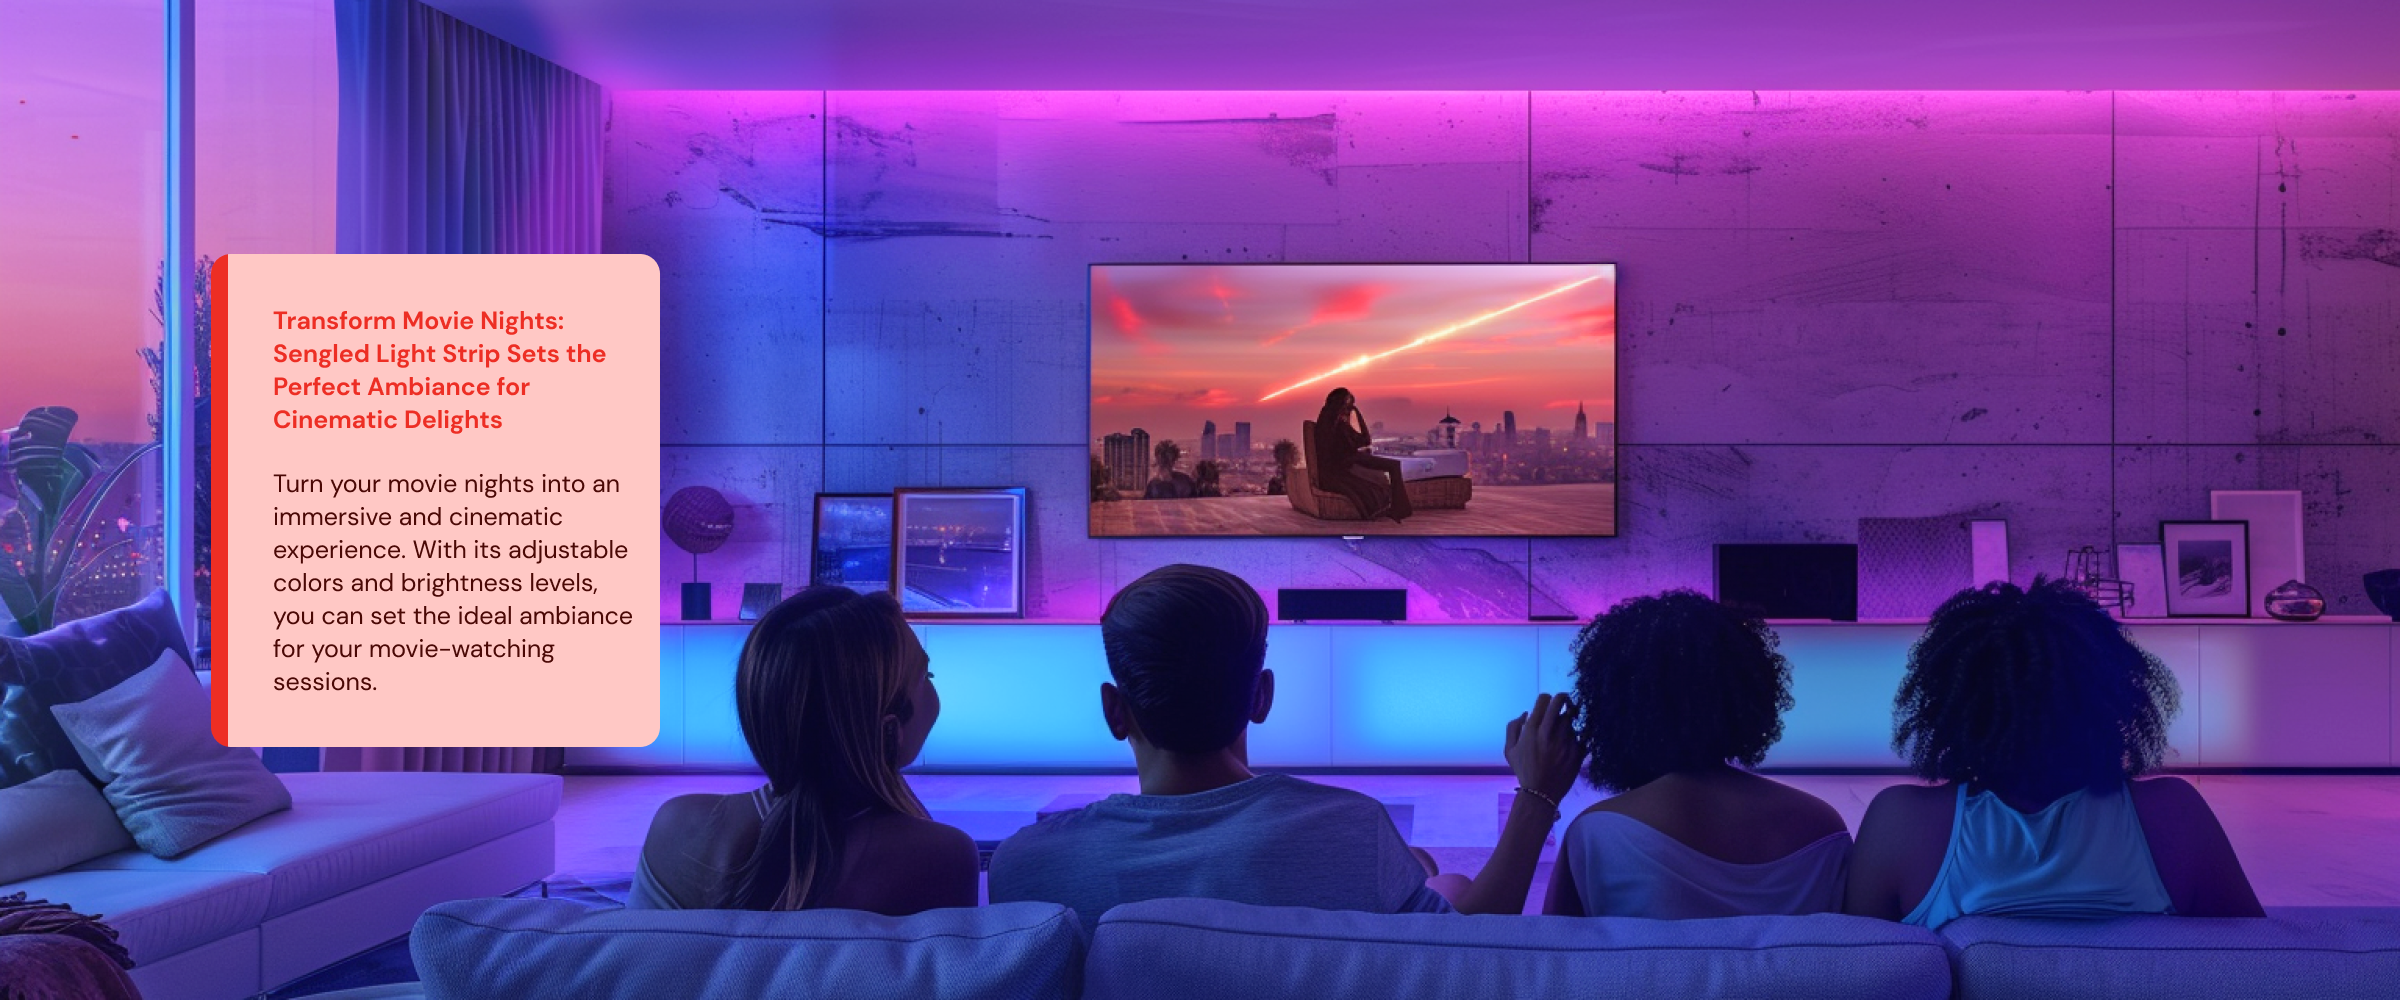 Transform Movie Nights: Sengled Light Strip Sets the Perfect Ambiance for Cinematic Delights